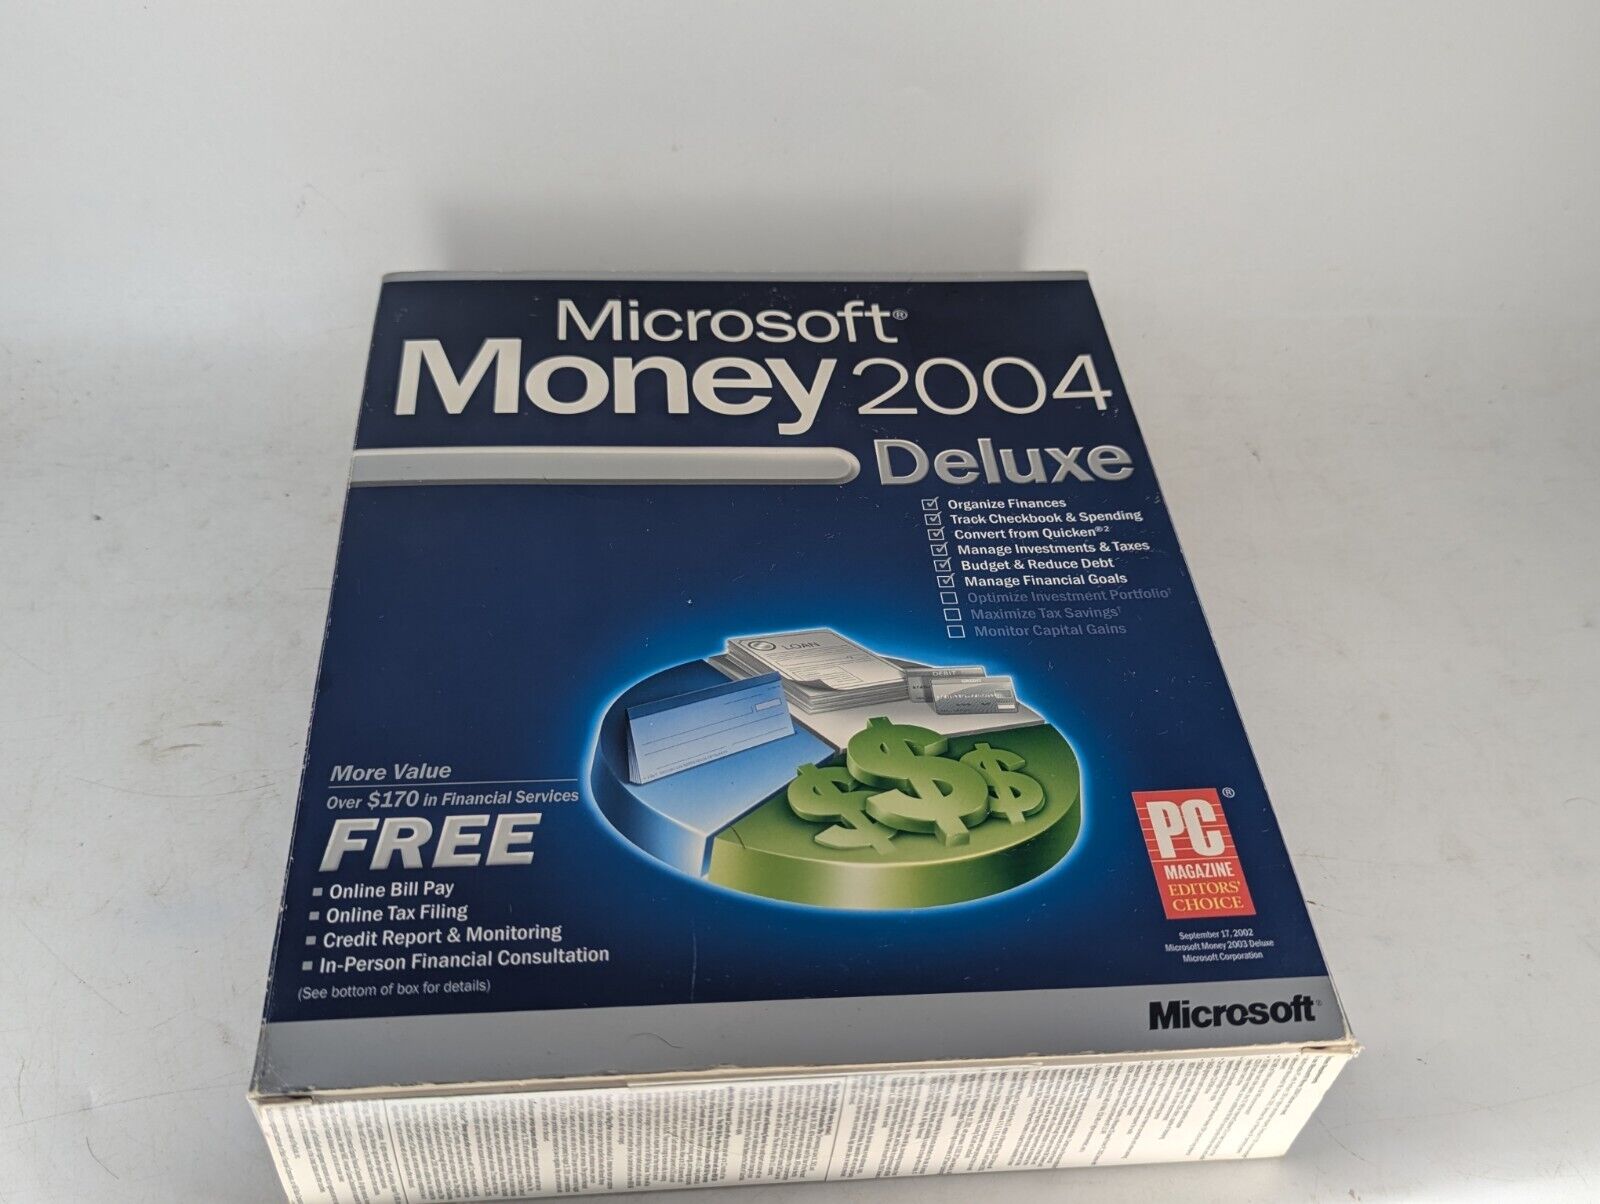 2004 Microsoft Money Deluxe For Windows Financial Manager (BIG BOX, BRAND NEW)